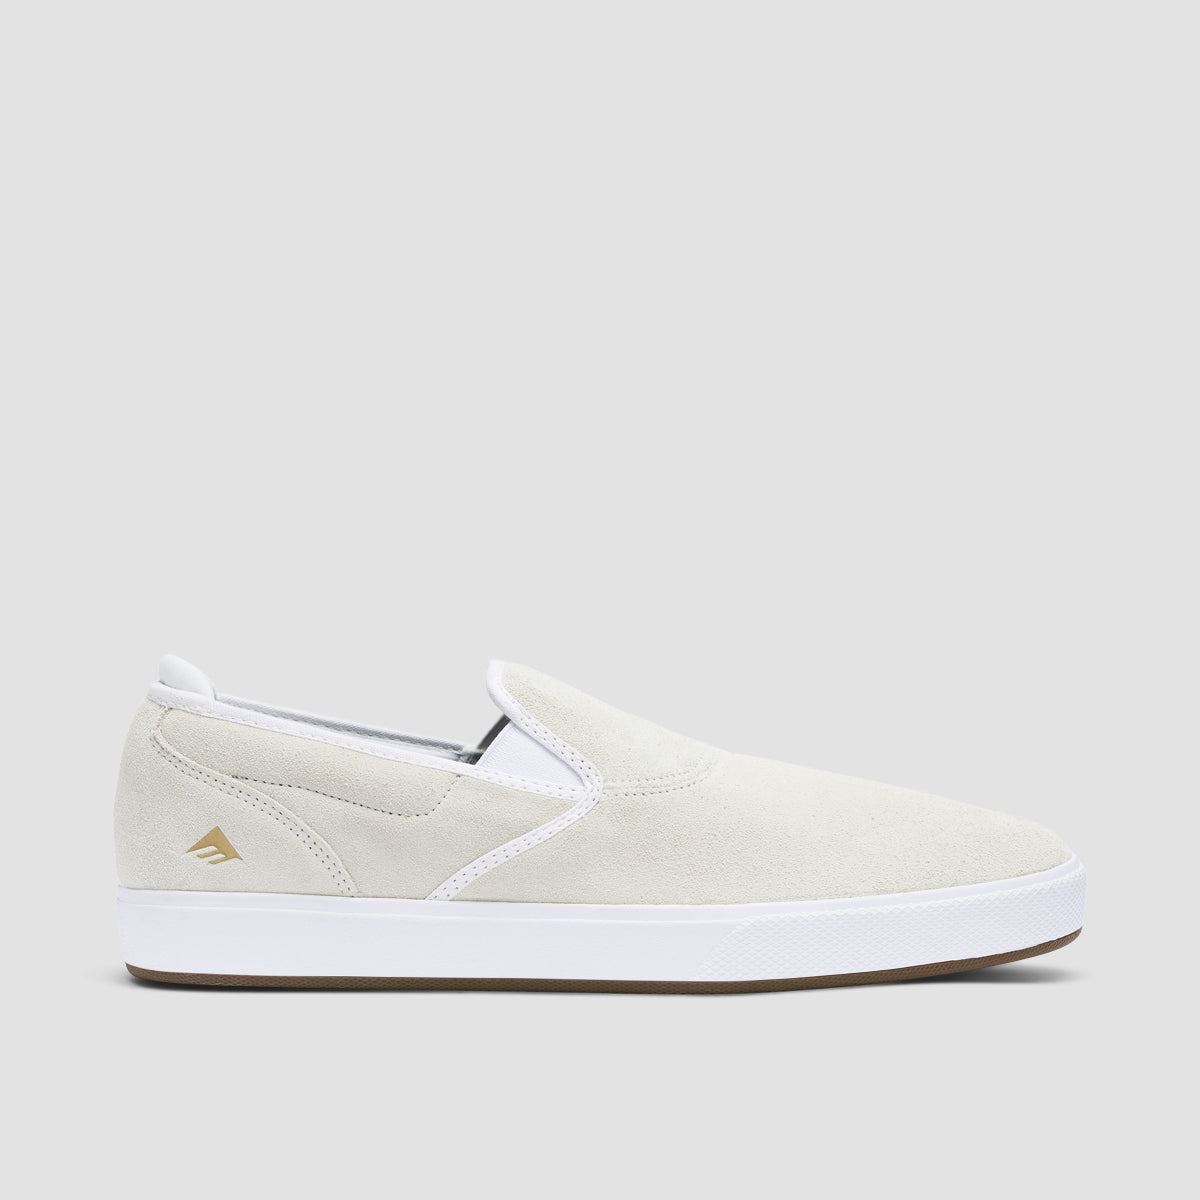 Emerica Wino G6 Cup Slip On Shoes White